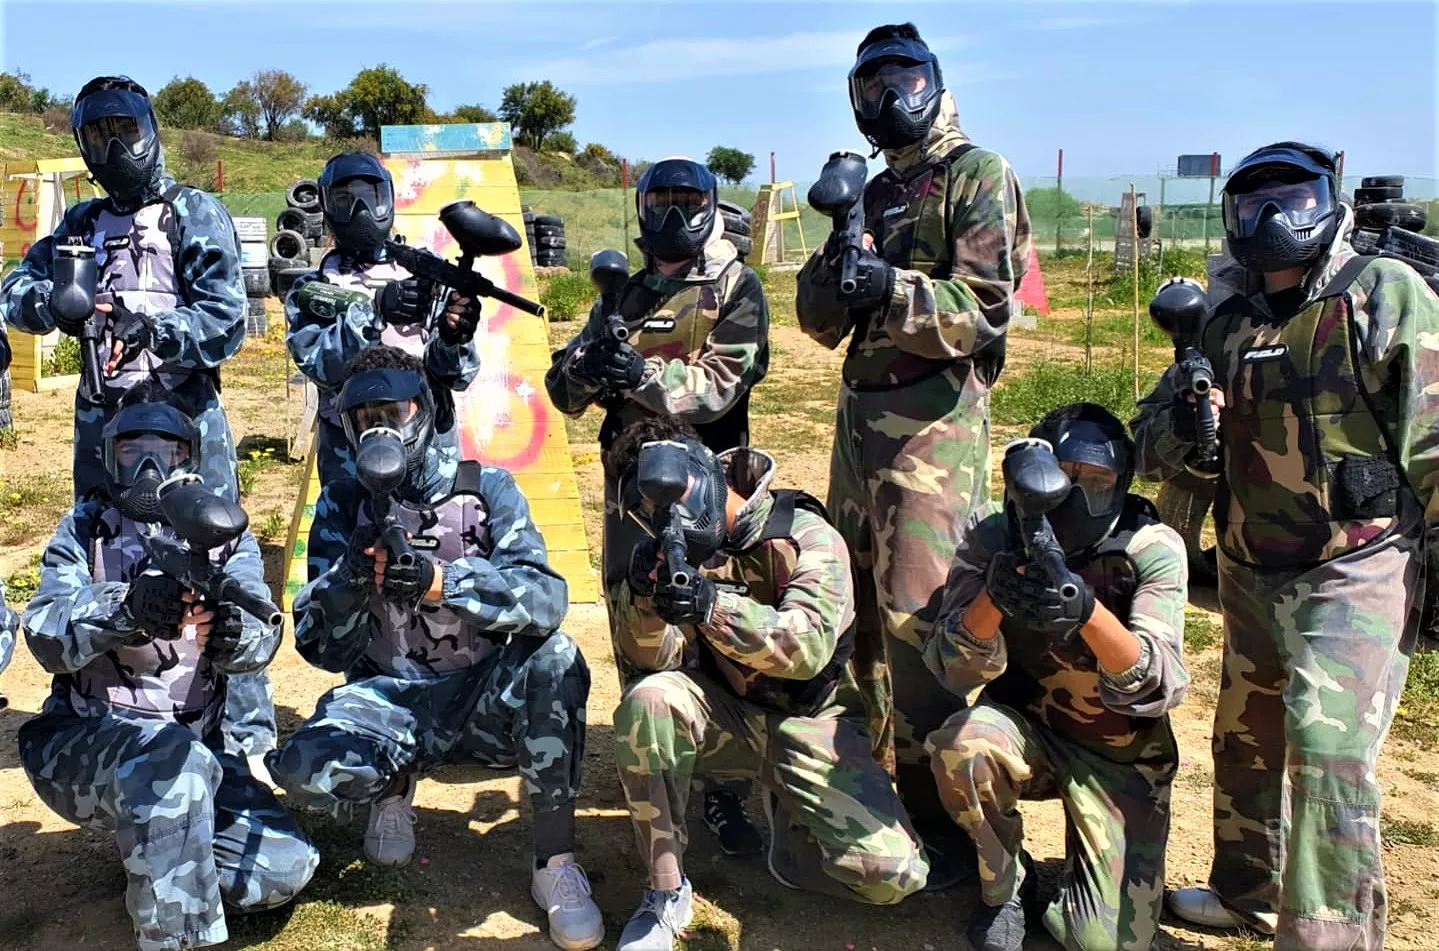 Temara Paint Ball in Morocco, Africa | Paintball - Rated 0.9